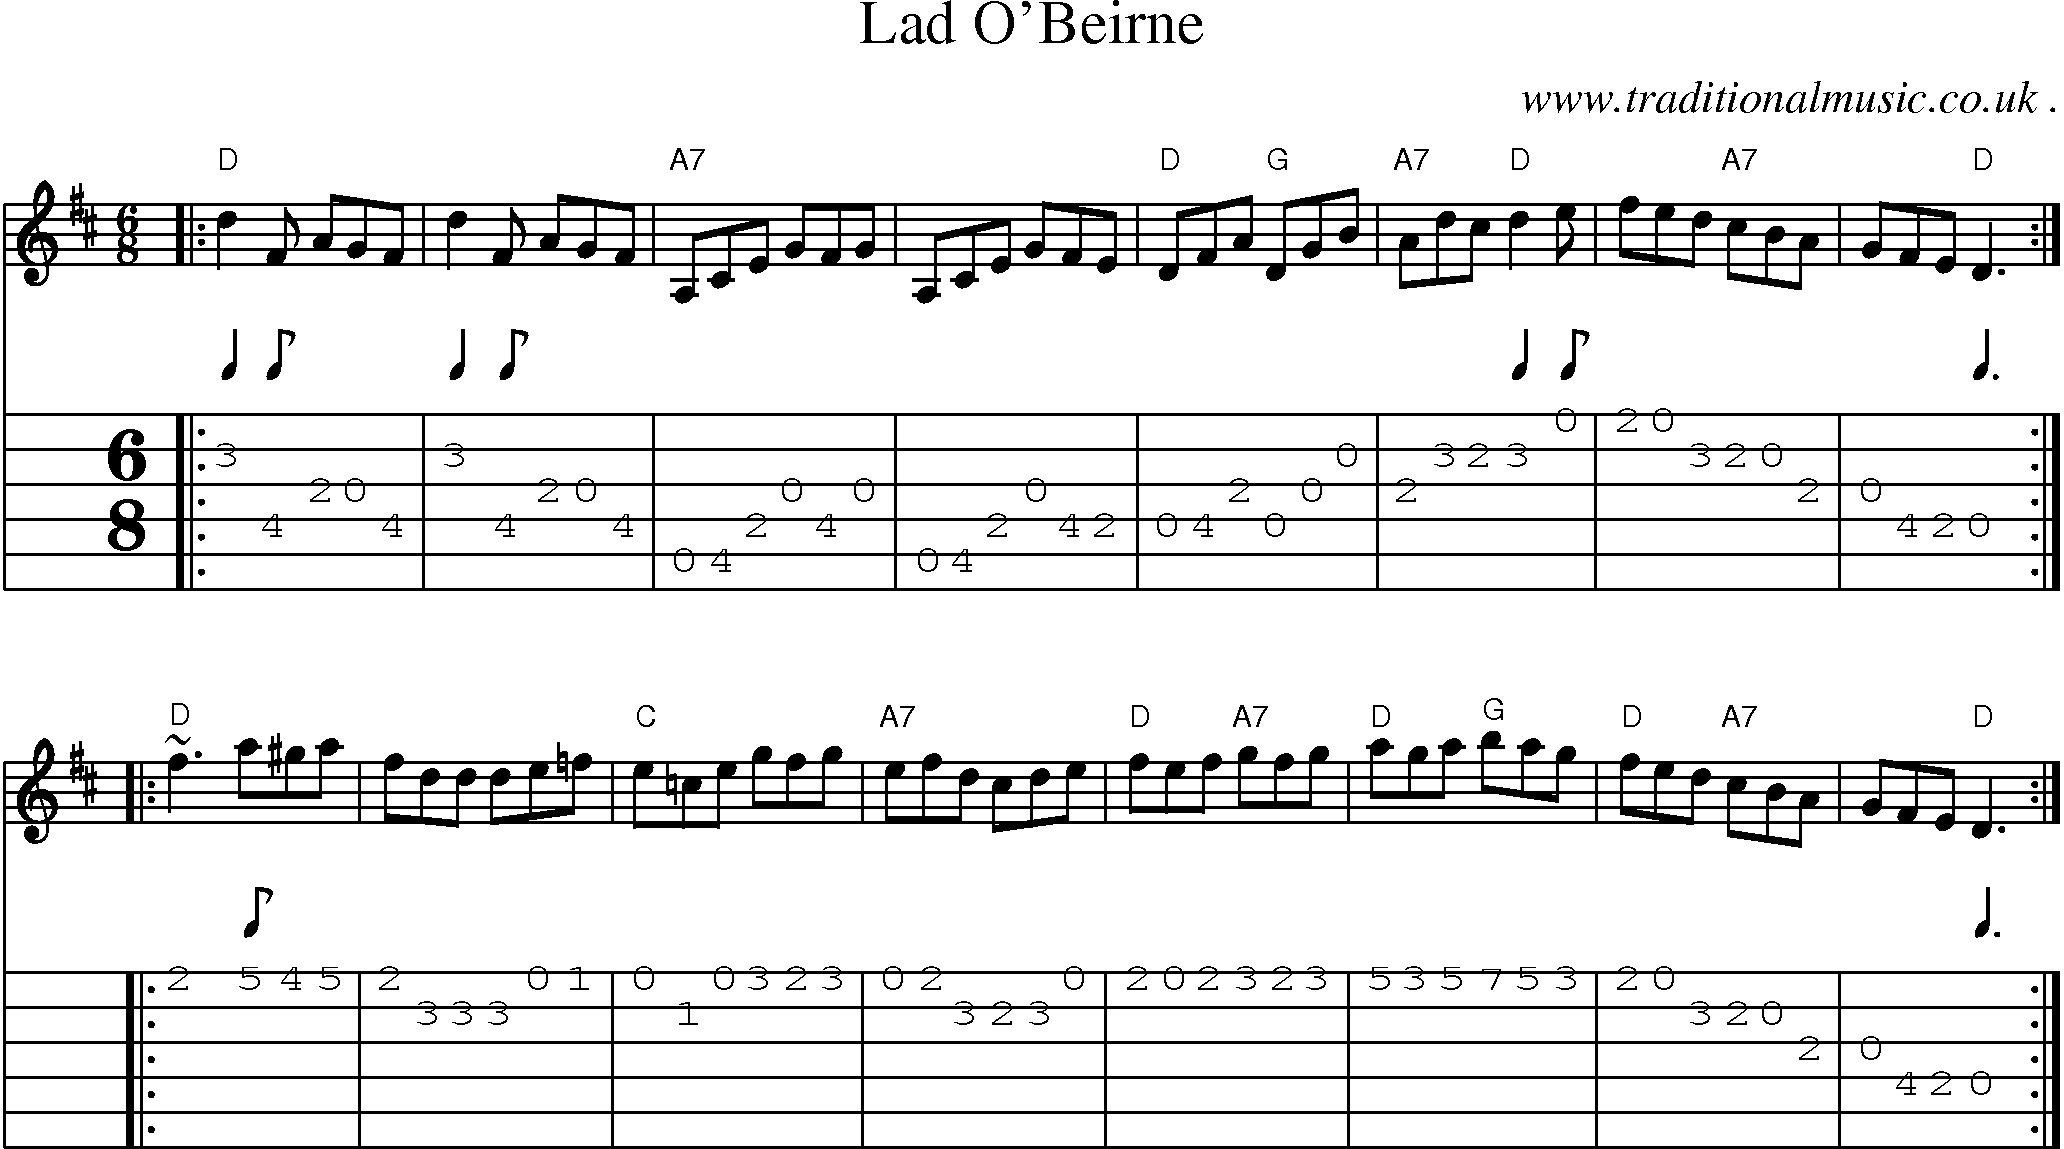 Sheet-music  score, Chords and Guitar Tabs for Lad Obeirne